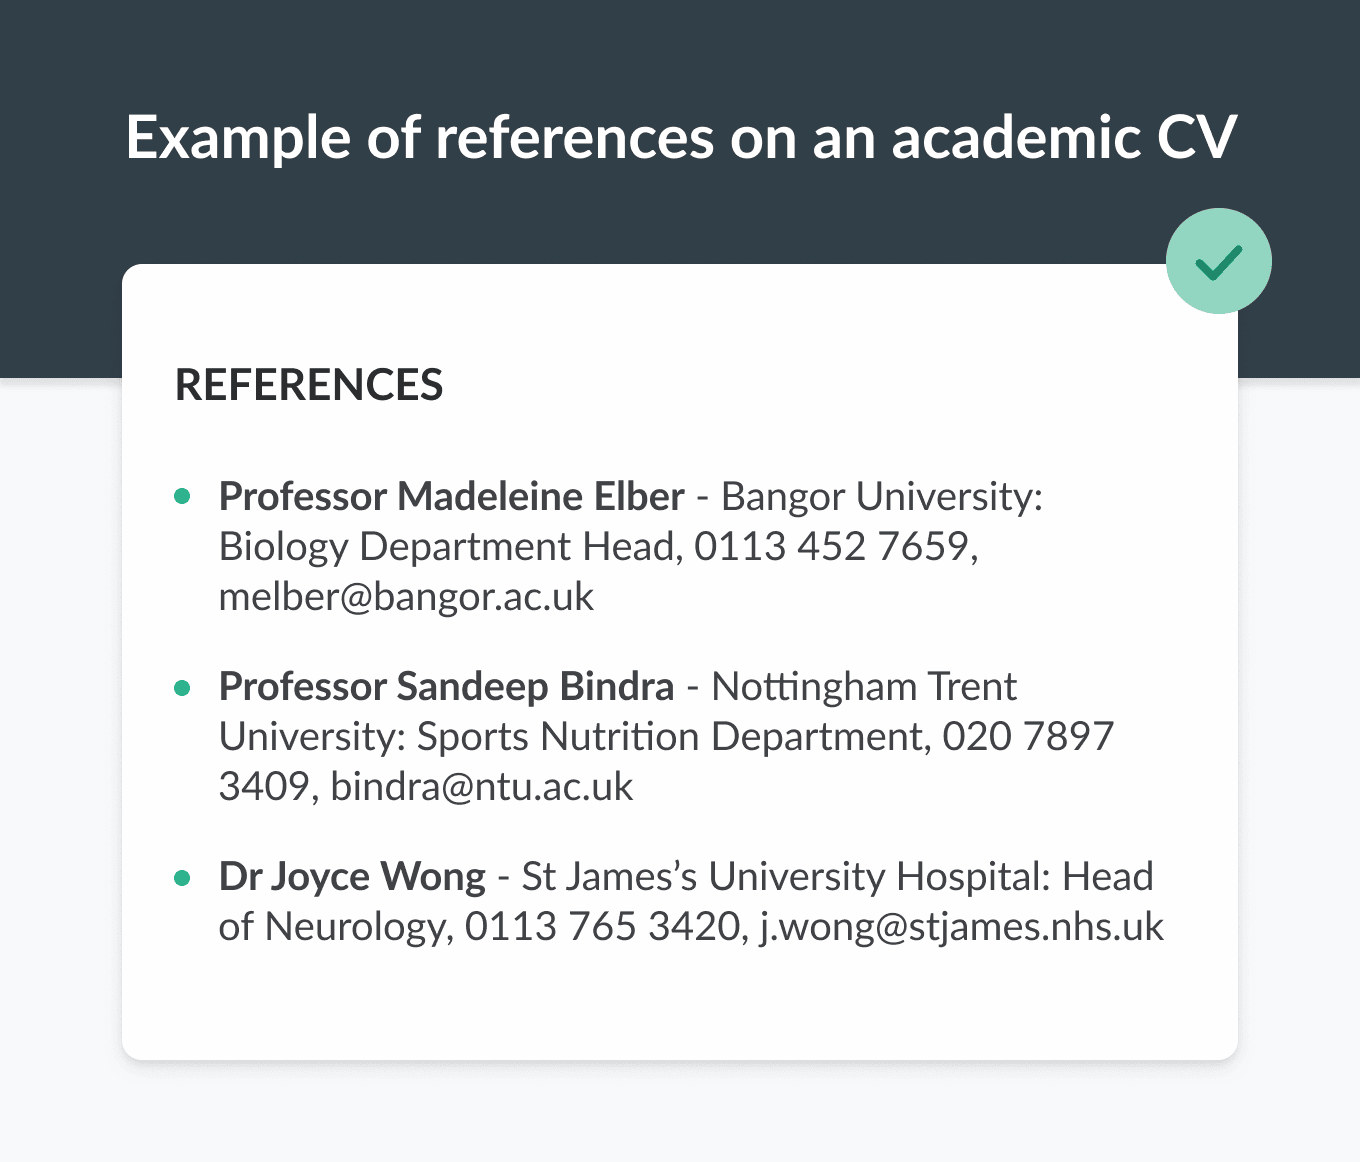 The references section of an academic CV with the contact information of three biology experts.